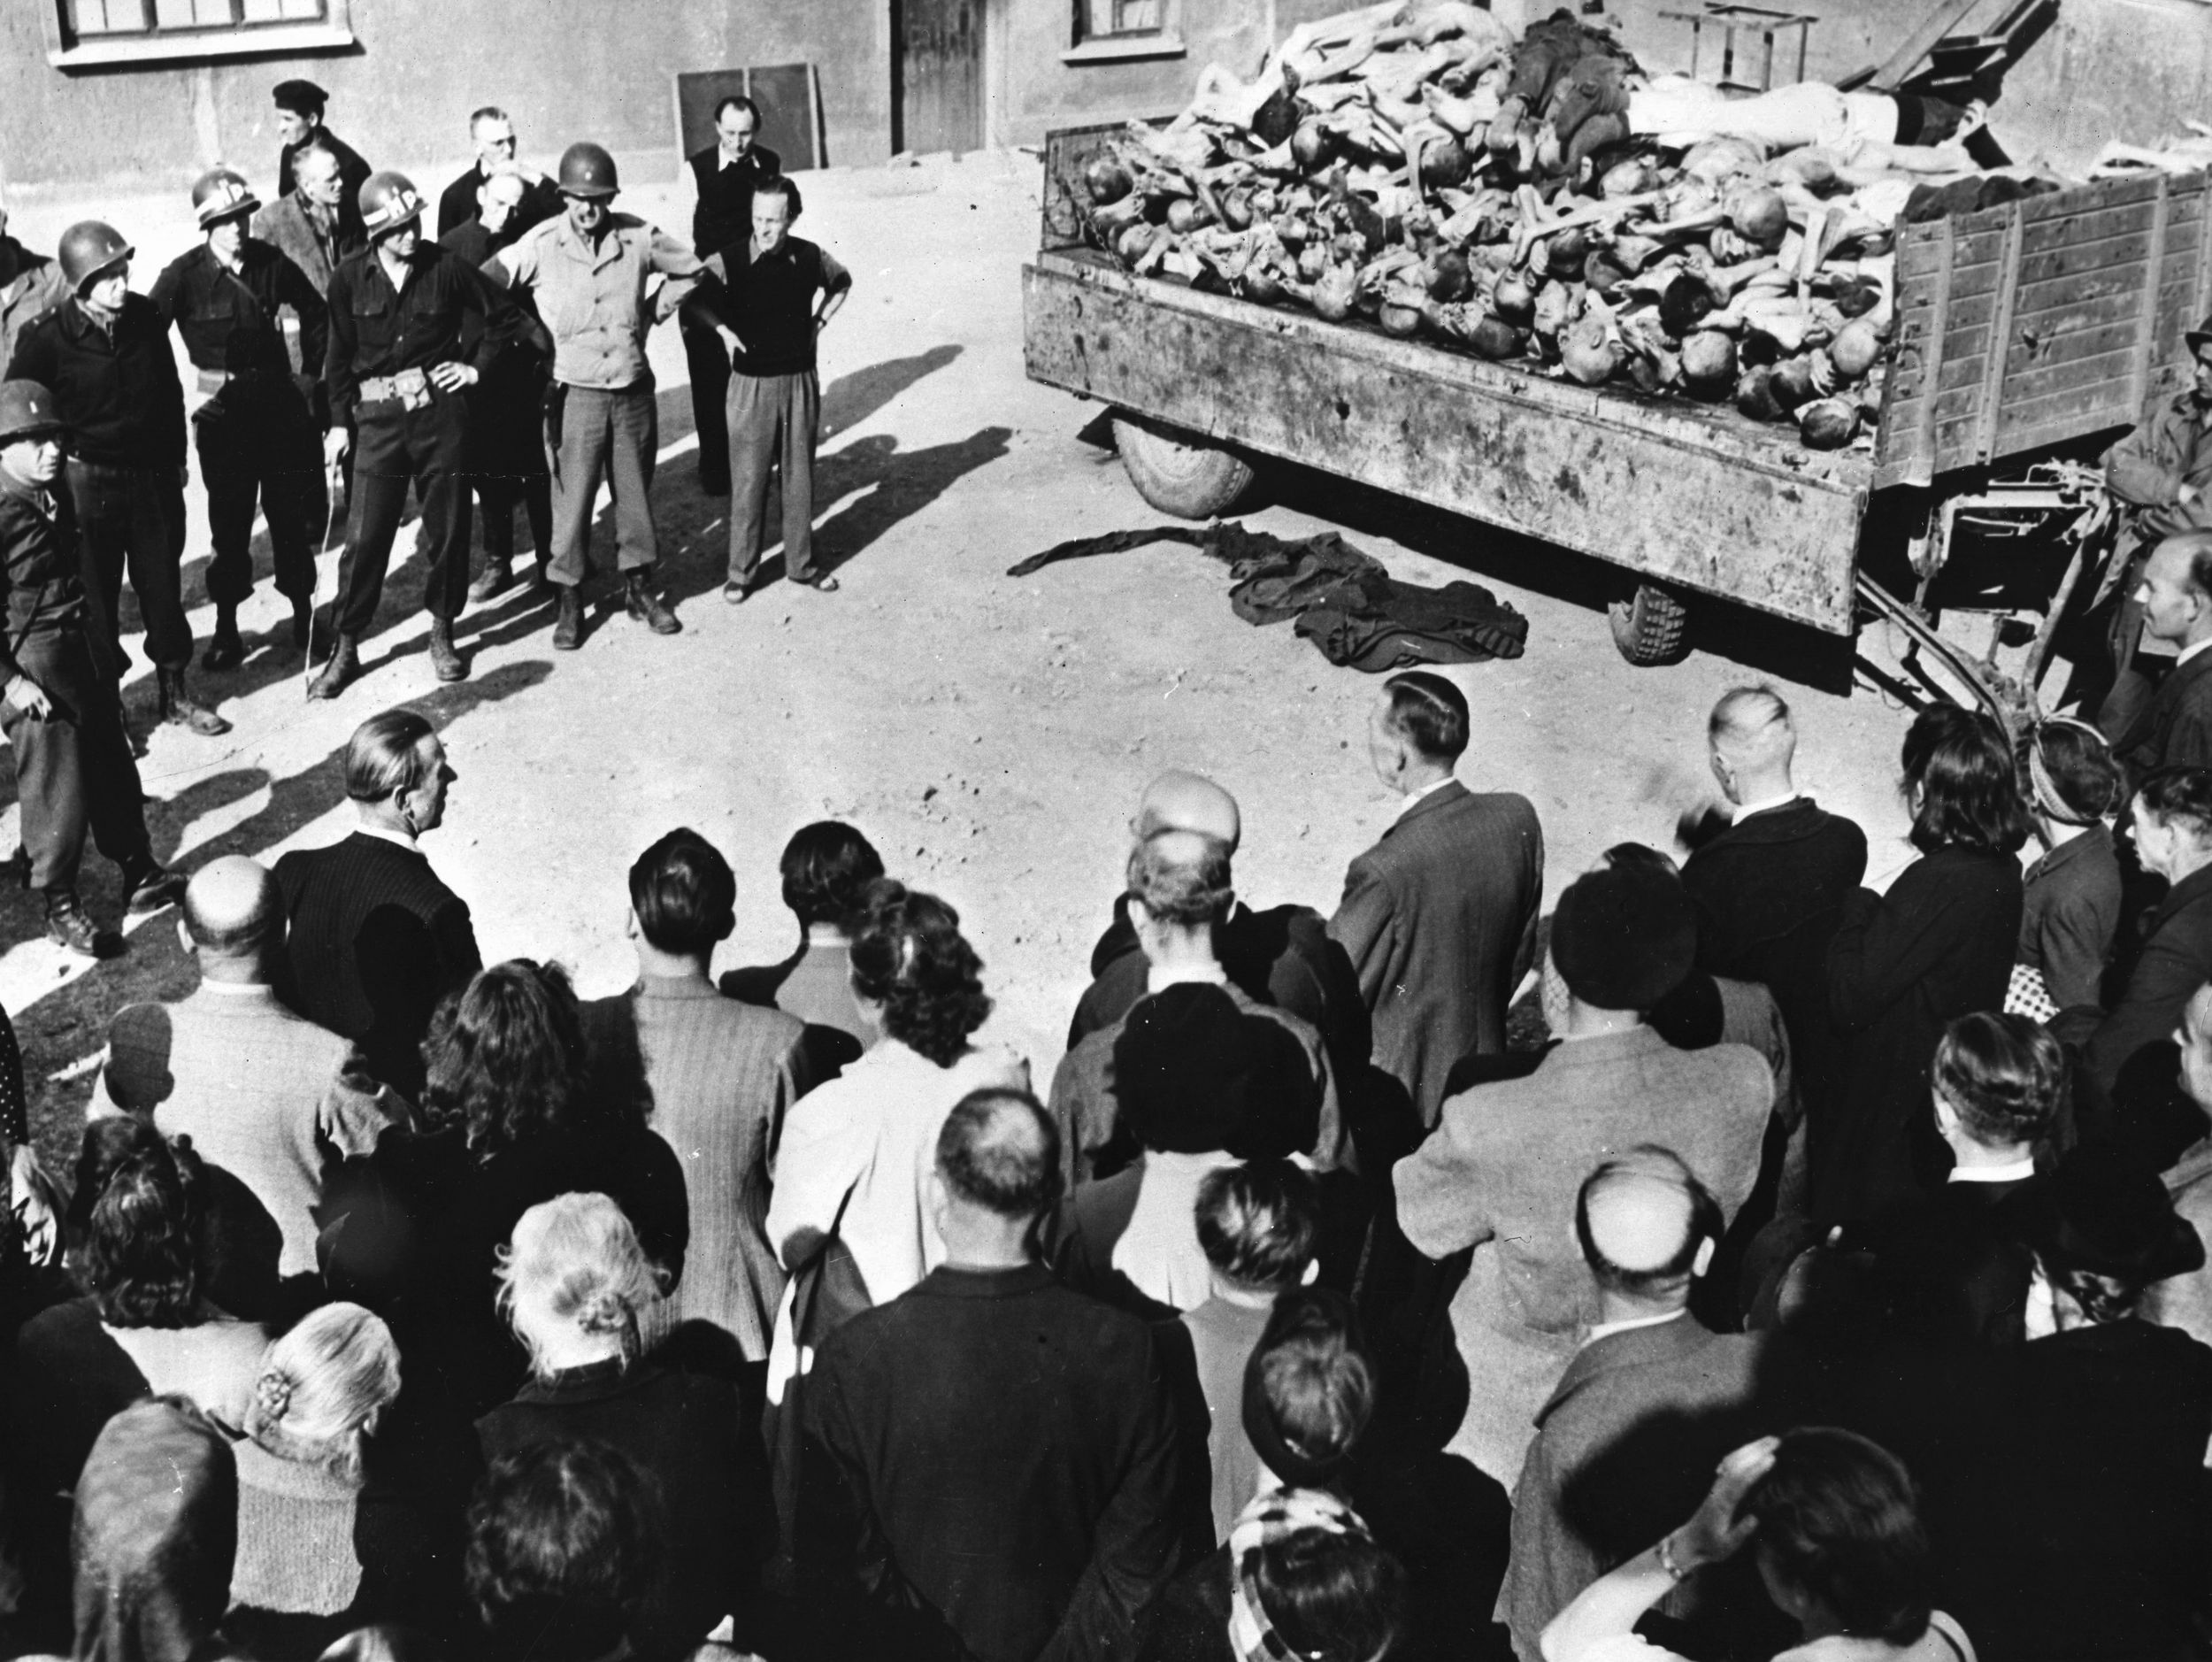 German civilians are forced to view the stacked bodies of dead Buchenwald inmates following the liberation of the camp. Some of the residents of nearby towns asserted that they were completely unaware of the atrocities taking place so close to their homes. (National Archives)